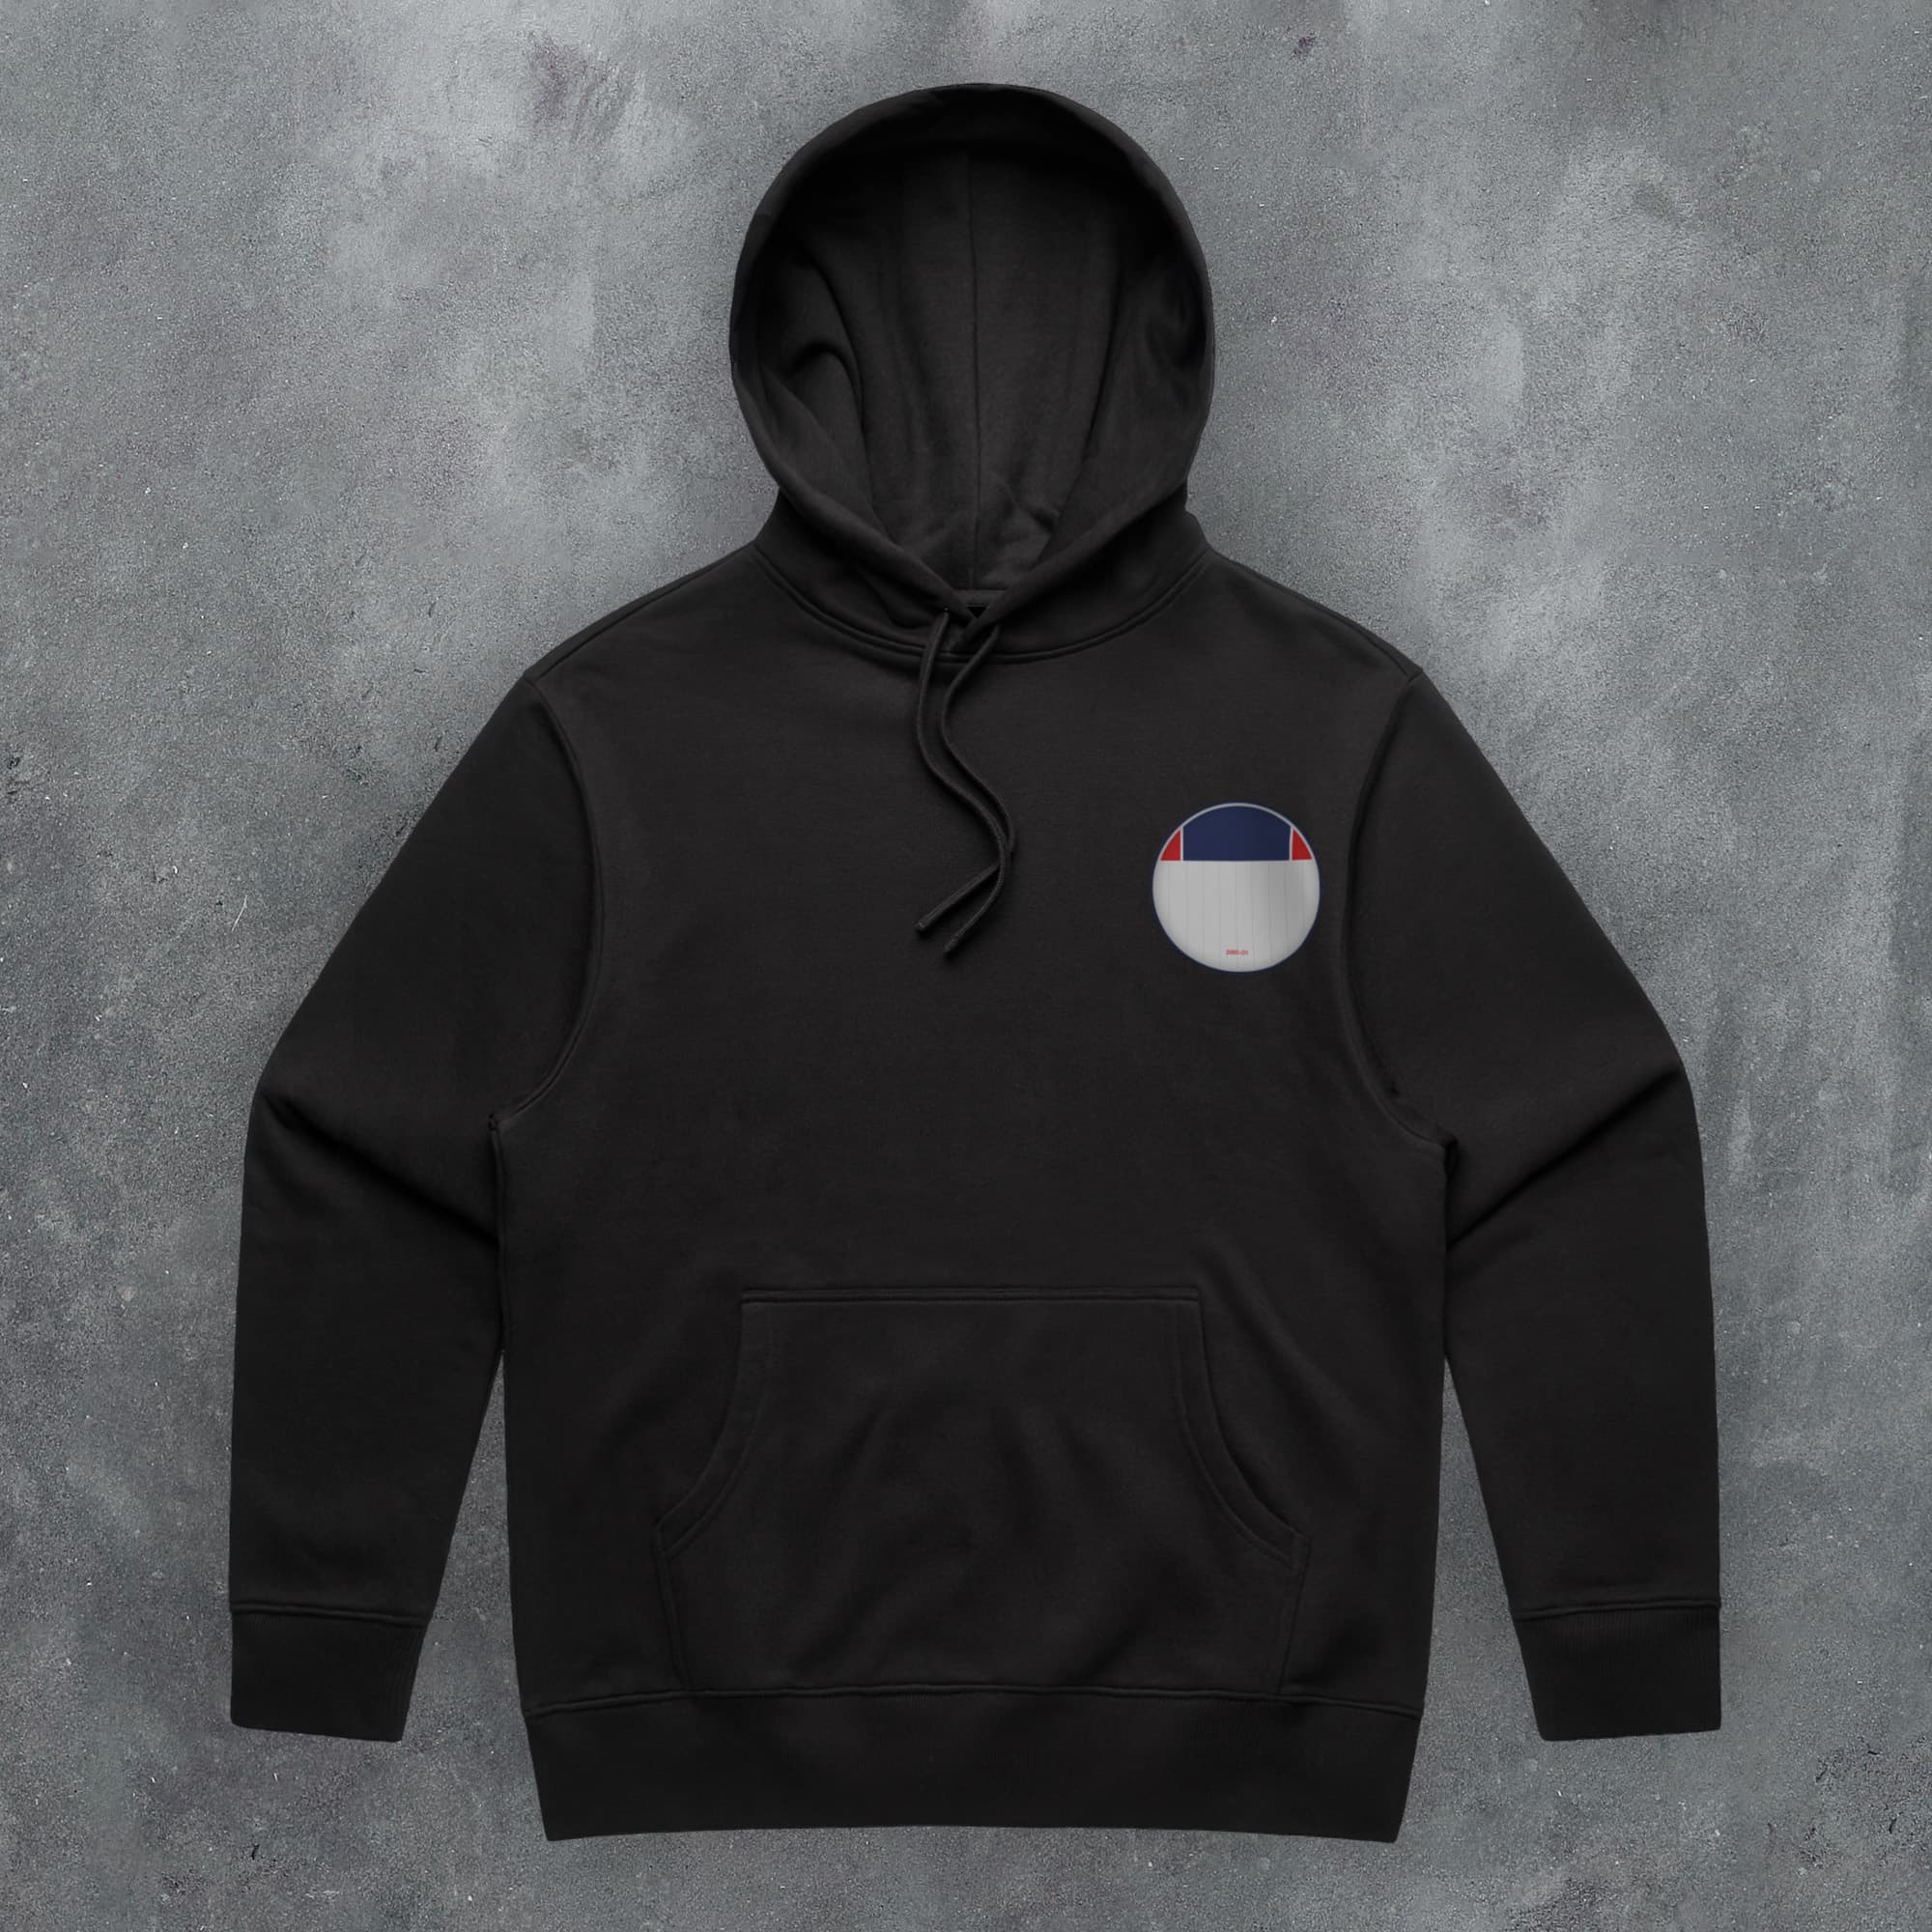 a black hoodie with a white and blue circle on it